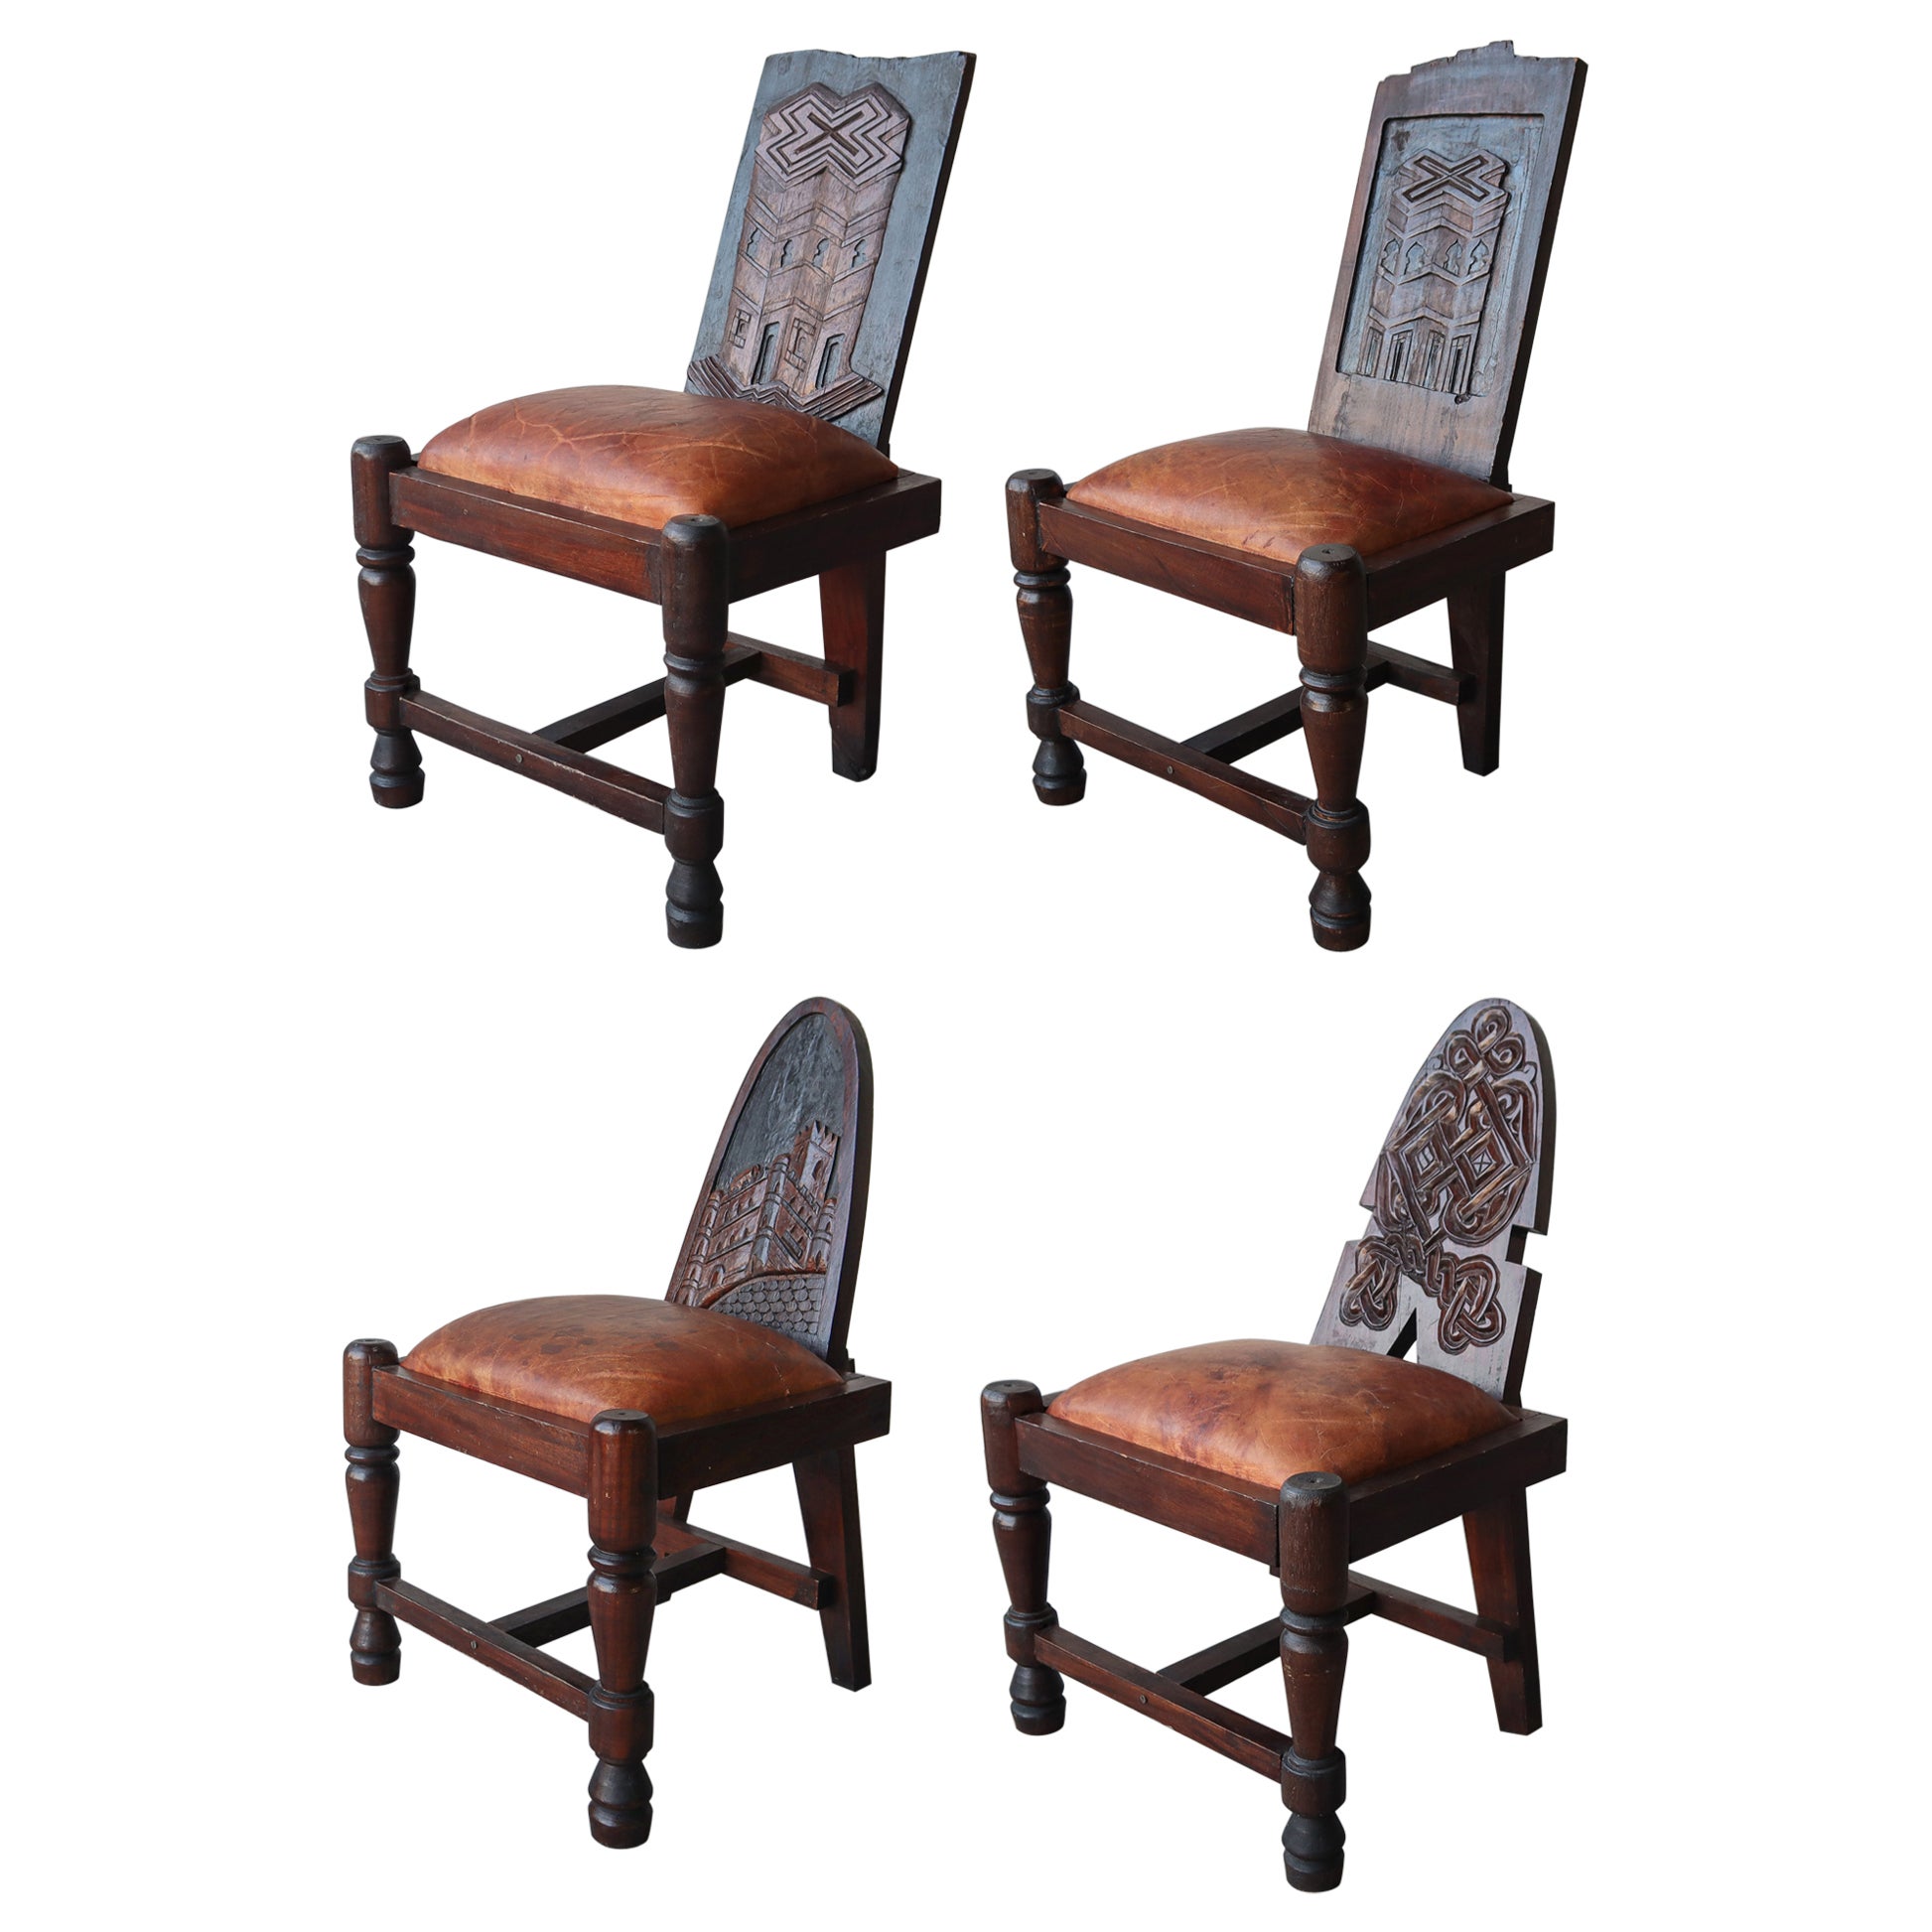 Primitive Hand Carved Wood and Leather Chairs For Sale